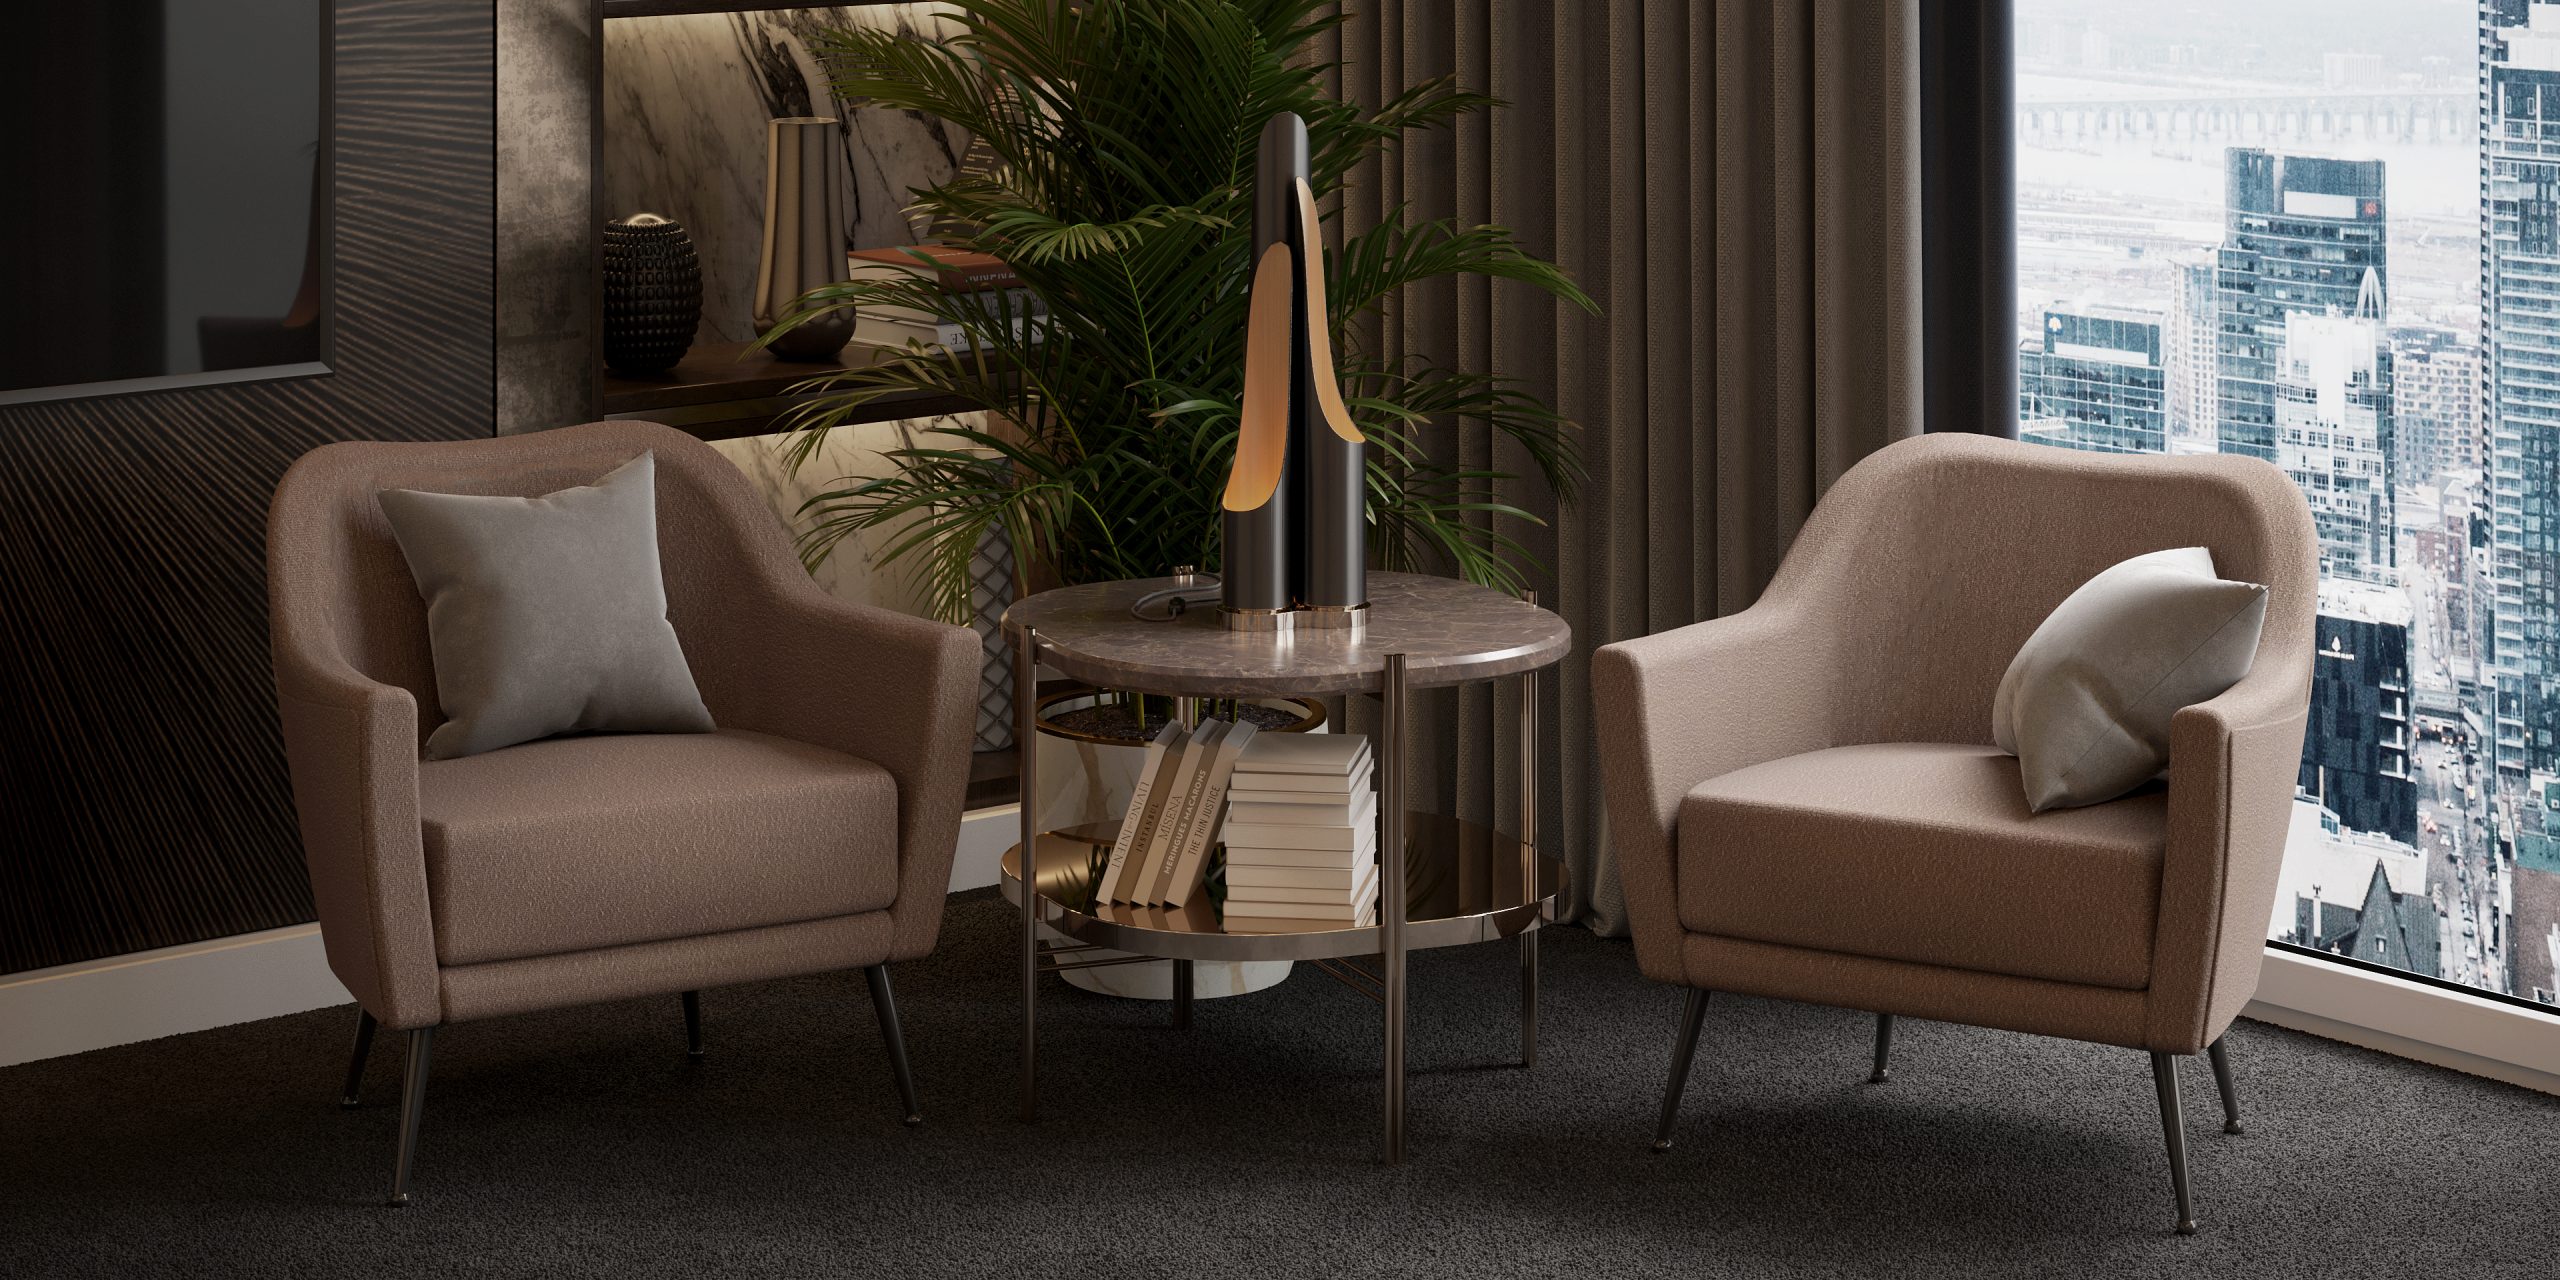 iSaloni 2023: Check Out The Mid-Century Pieces That Will Enlighten This Year's Edition!